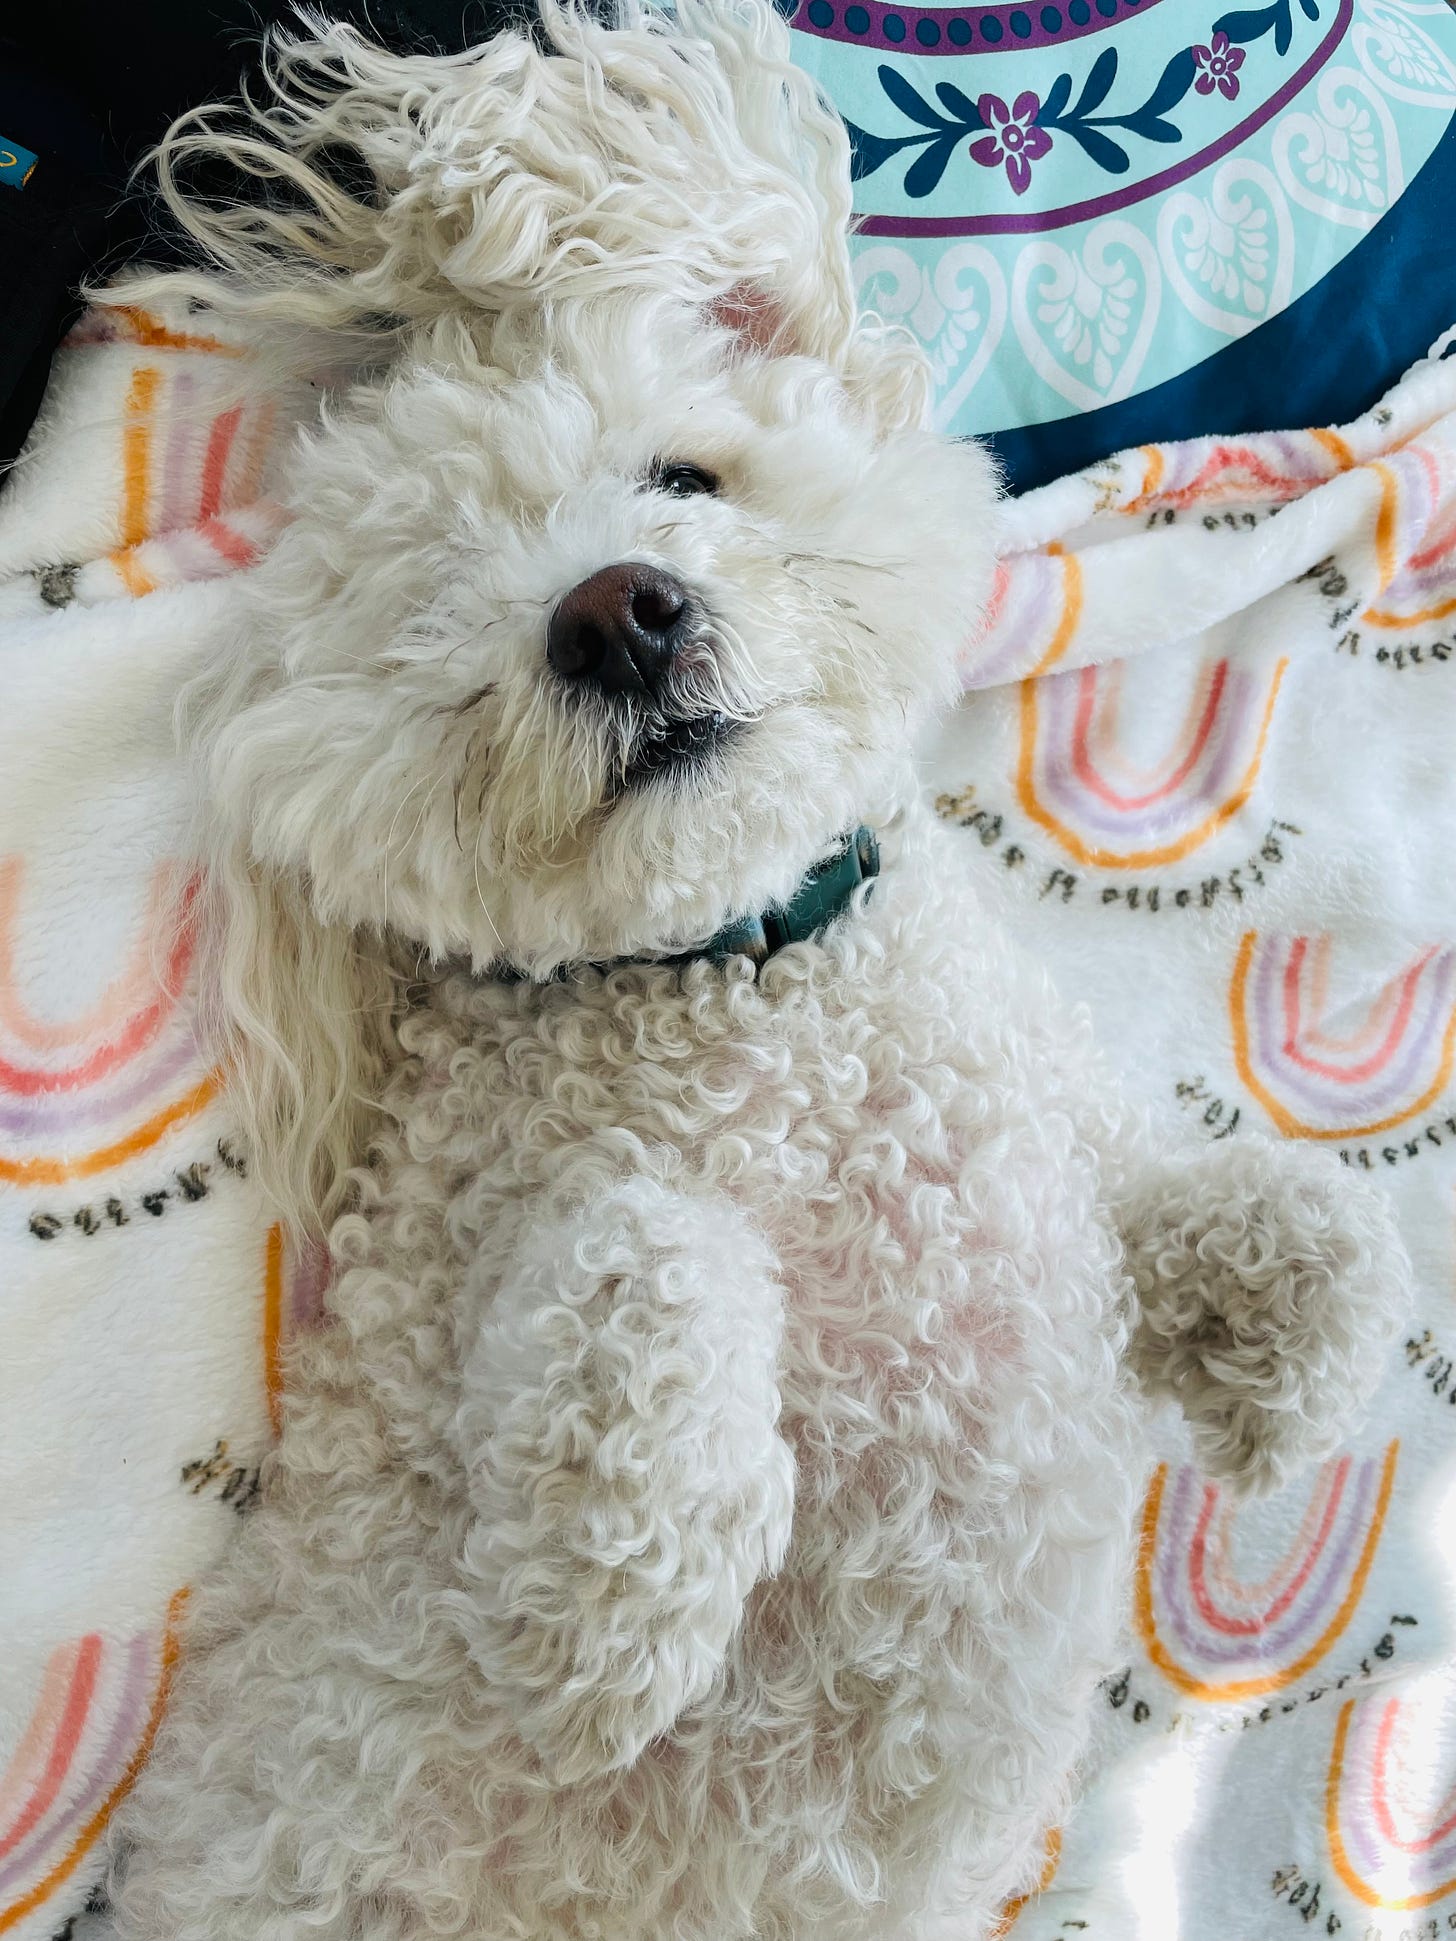 A fluffy white dog lies on his back, with one eye partially obstructed and both front paws up. He is atop a white blanket with orange, purple, and pink rainbows, as well as a blue and purple comforter.